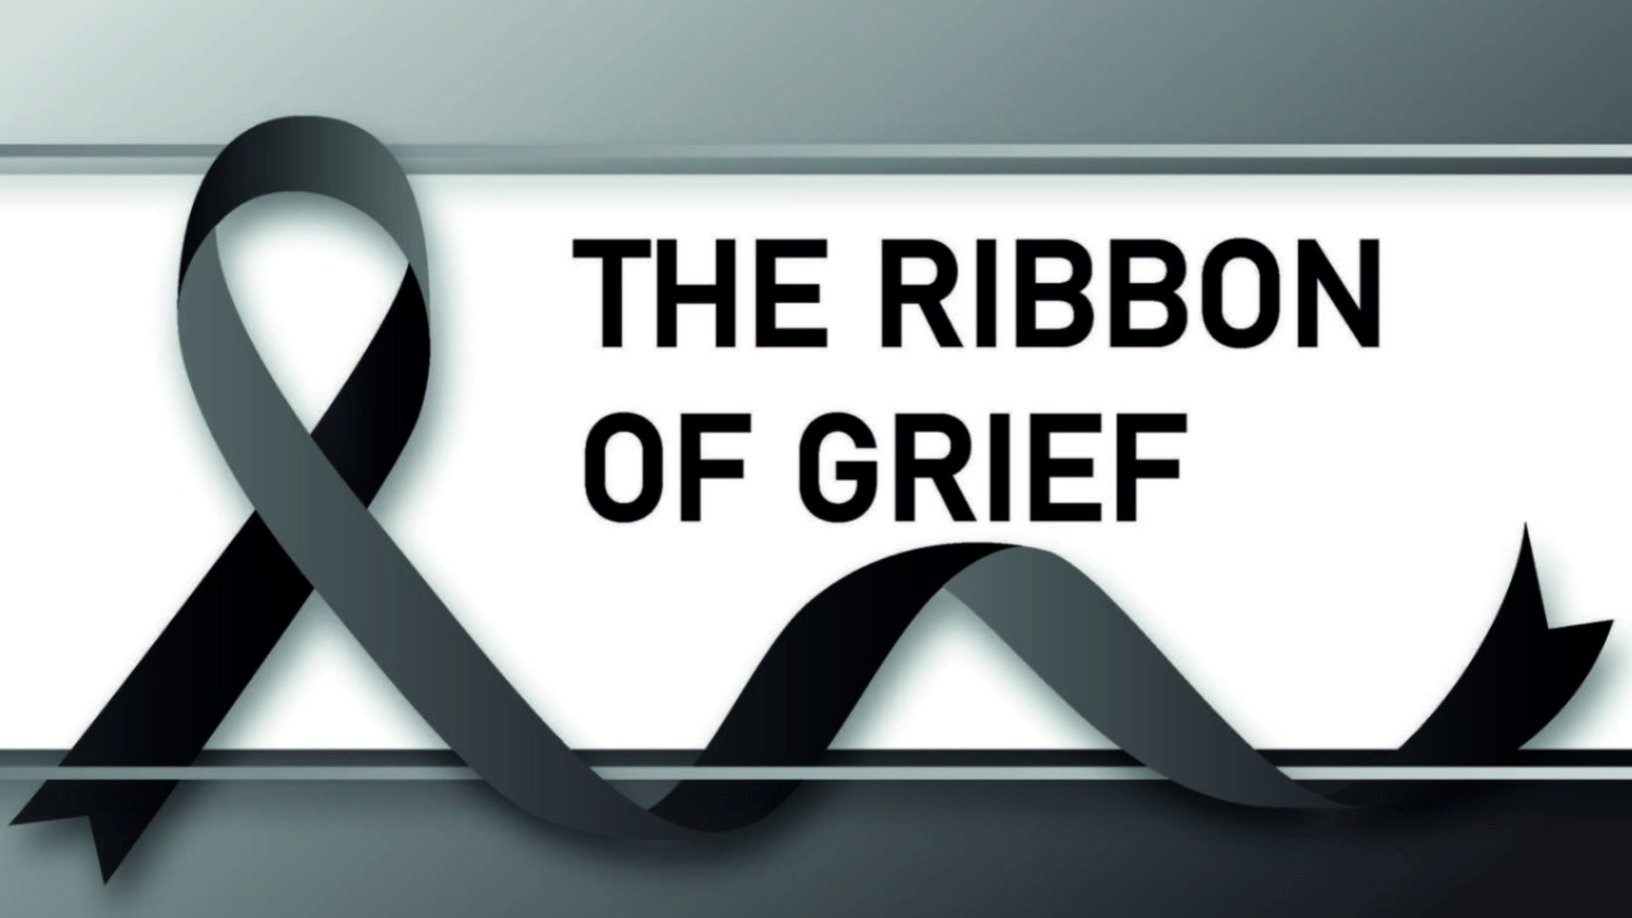 The Ribbon of Grief